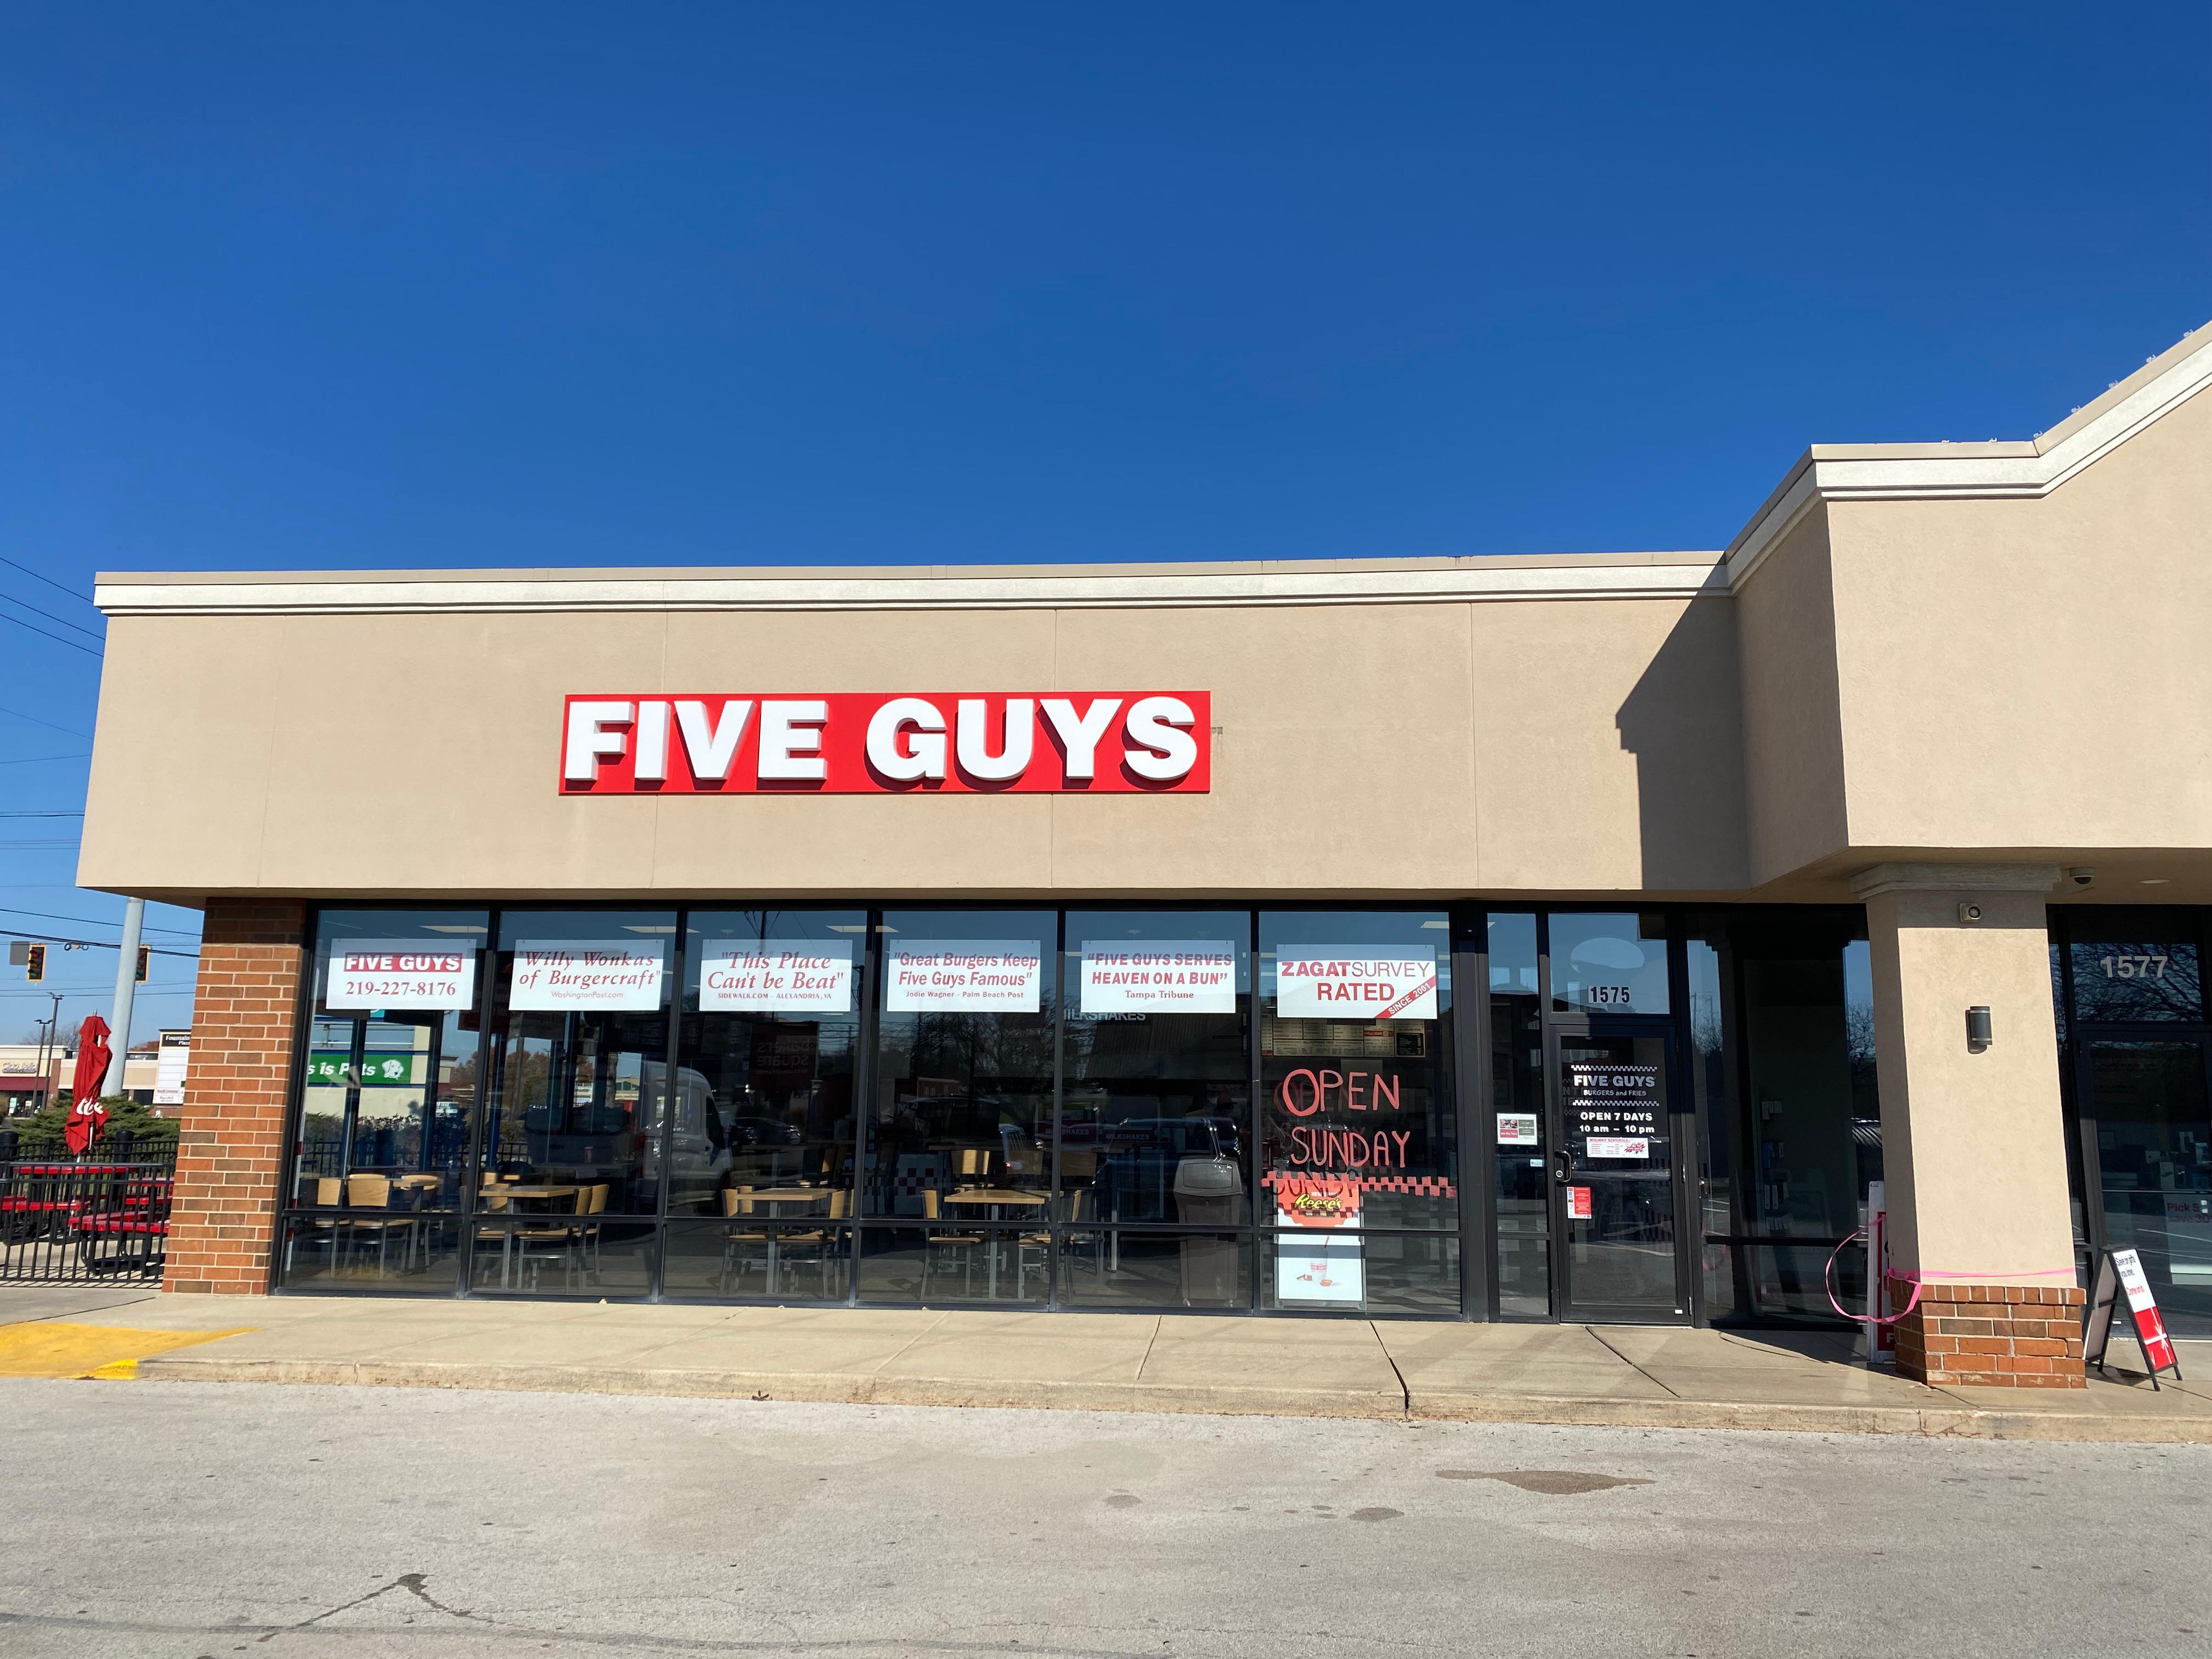 Exterior photograph of the entrance to the Five Guys restaurant at 1575 US Hwy 41 in Schererville, Indiana.